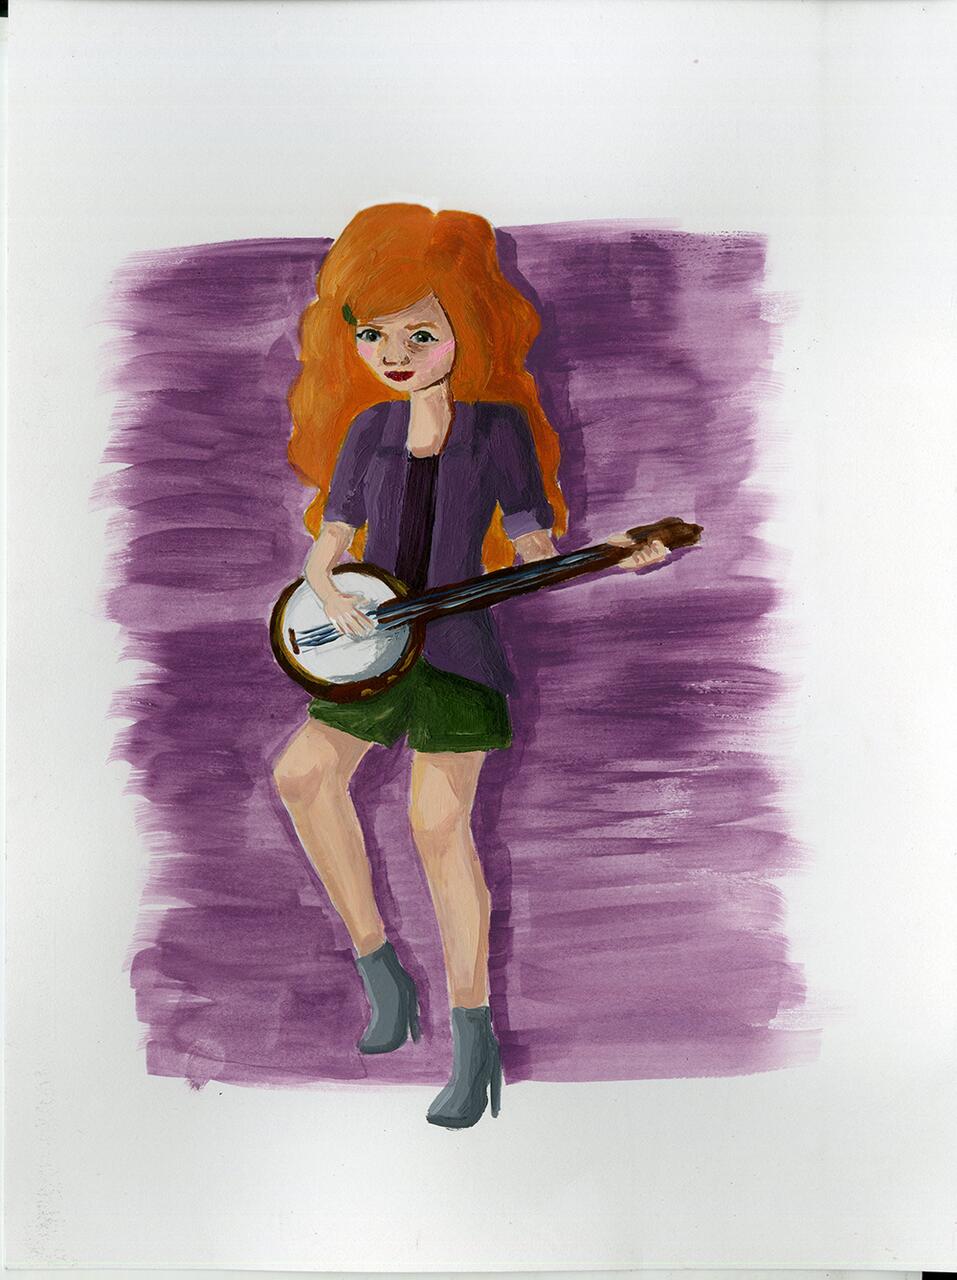 Painting of figure playing banjo set against a purple background.